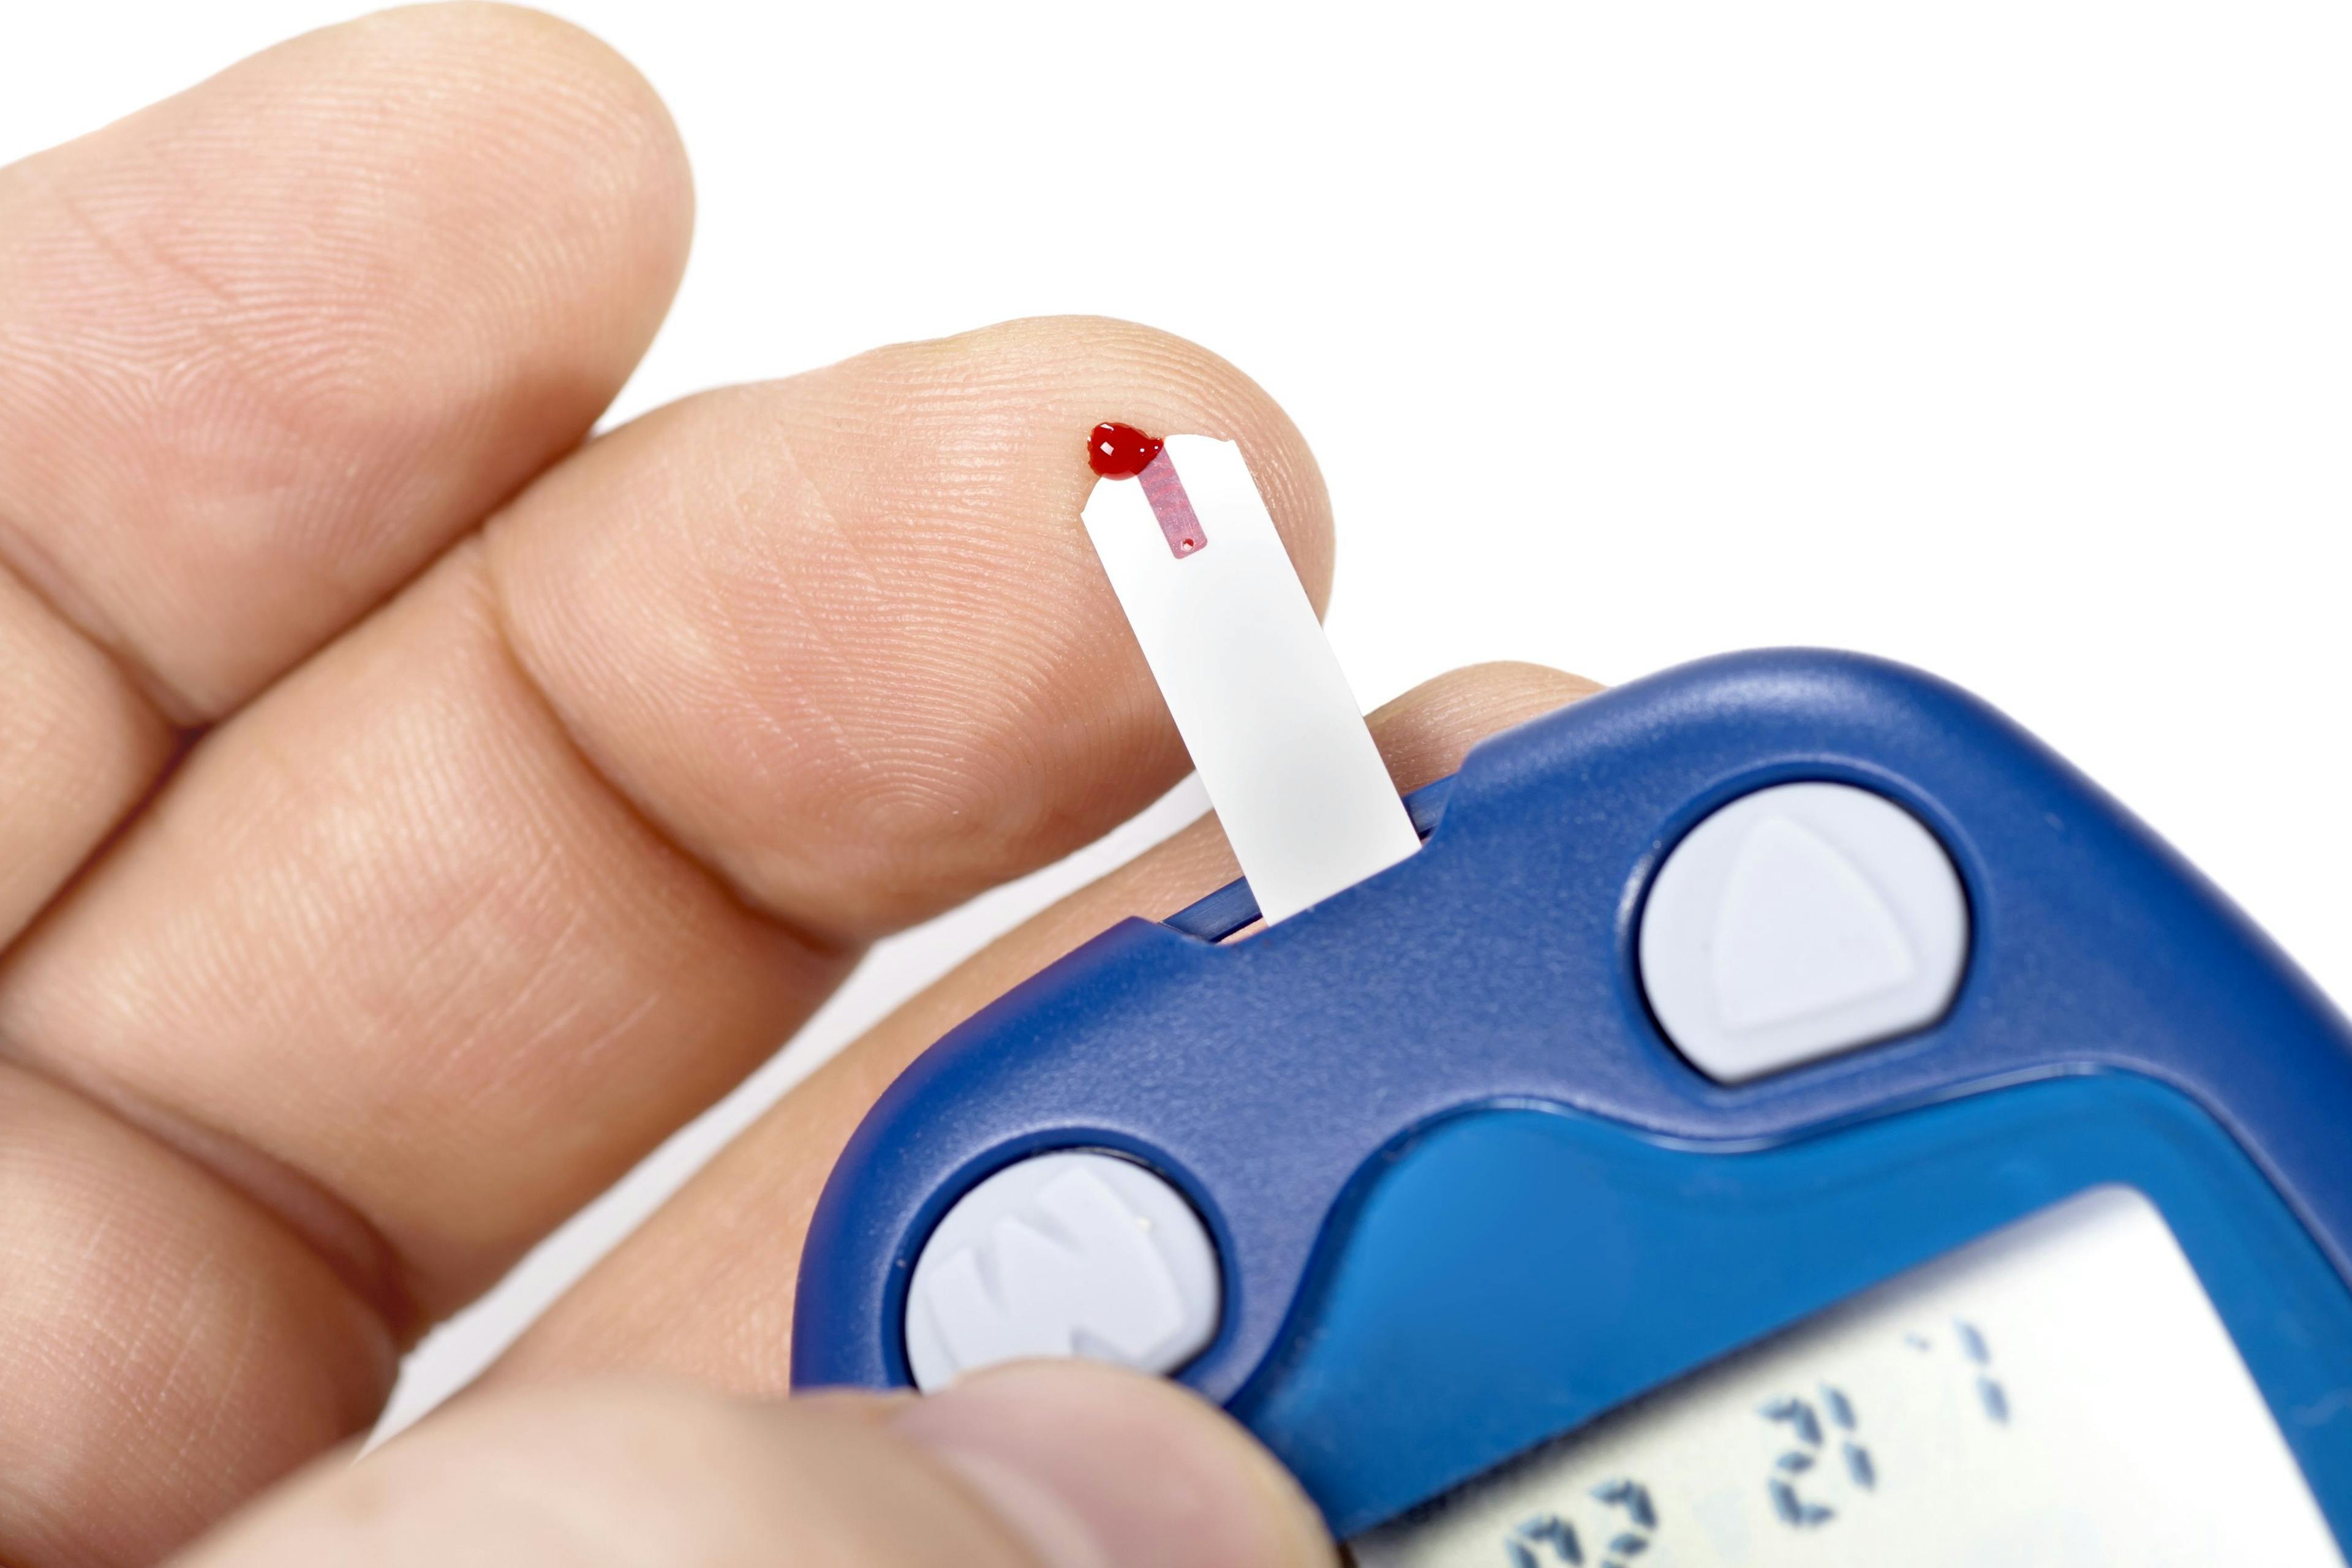 New Dose of Semaglutide Shows Improved Blood Sugar Reduction in Study